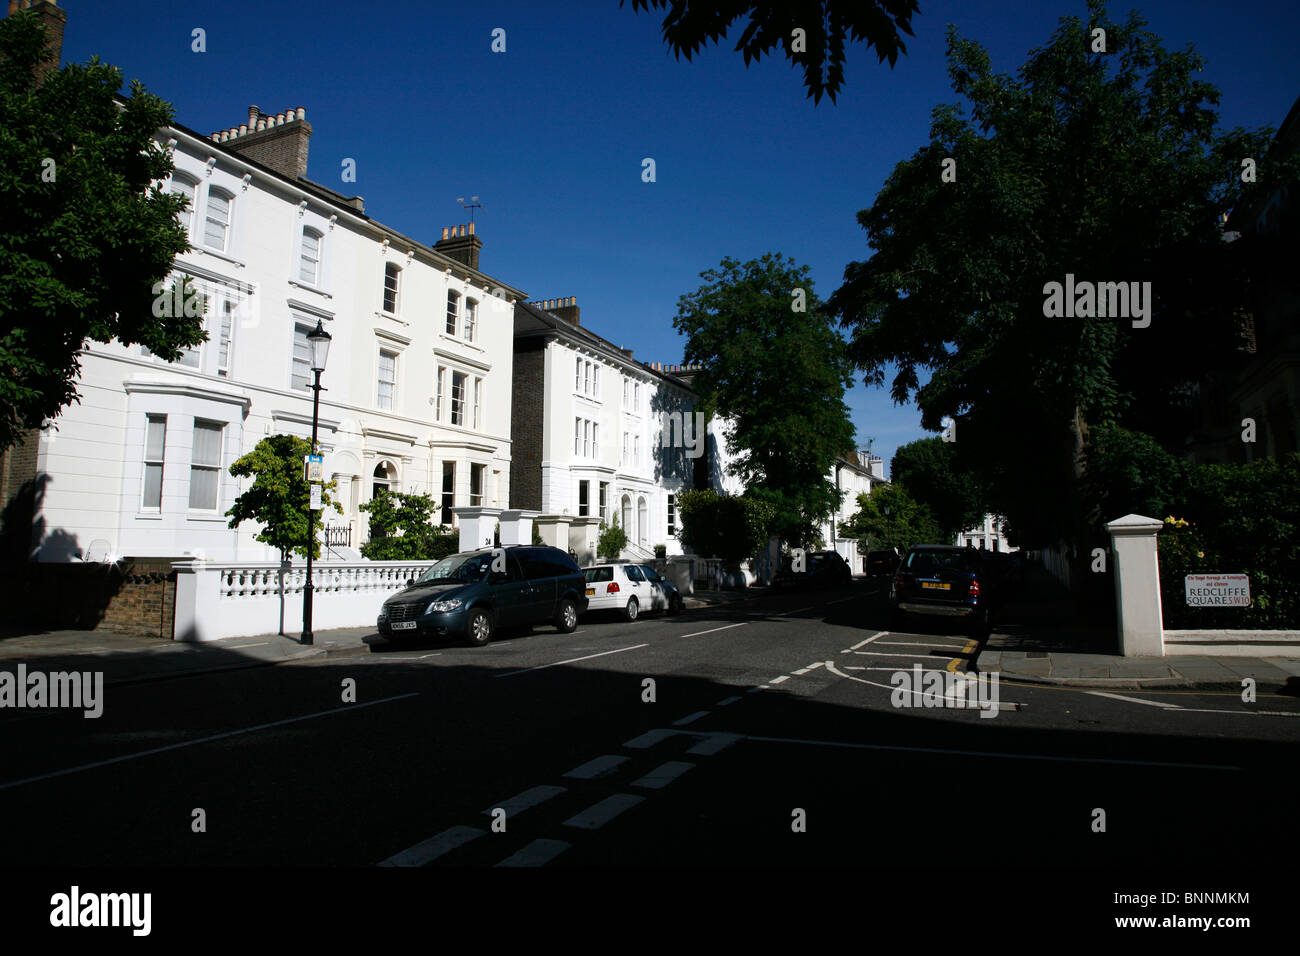 The Little Boltons, West Brompton, London, UK Stock Photo